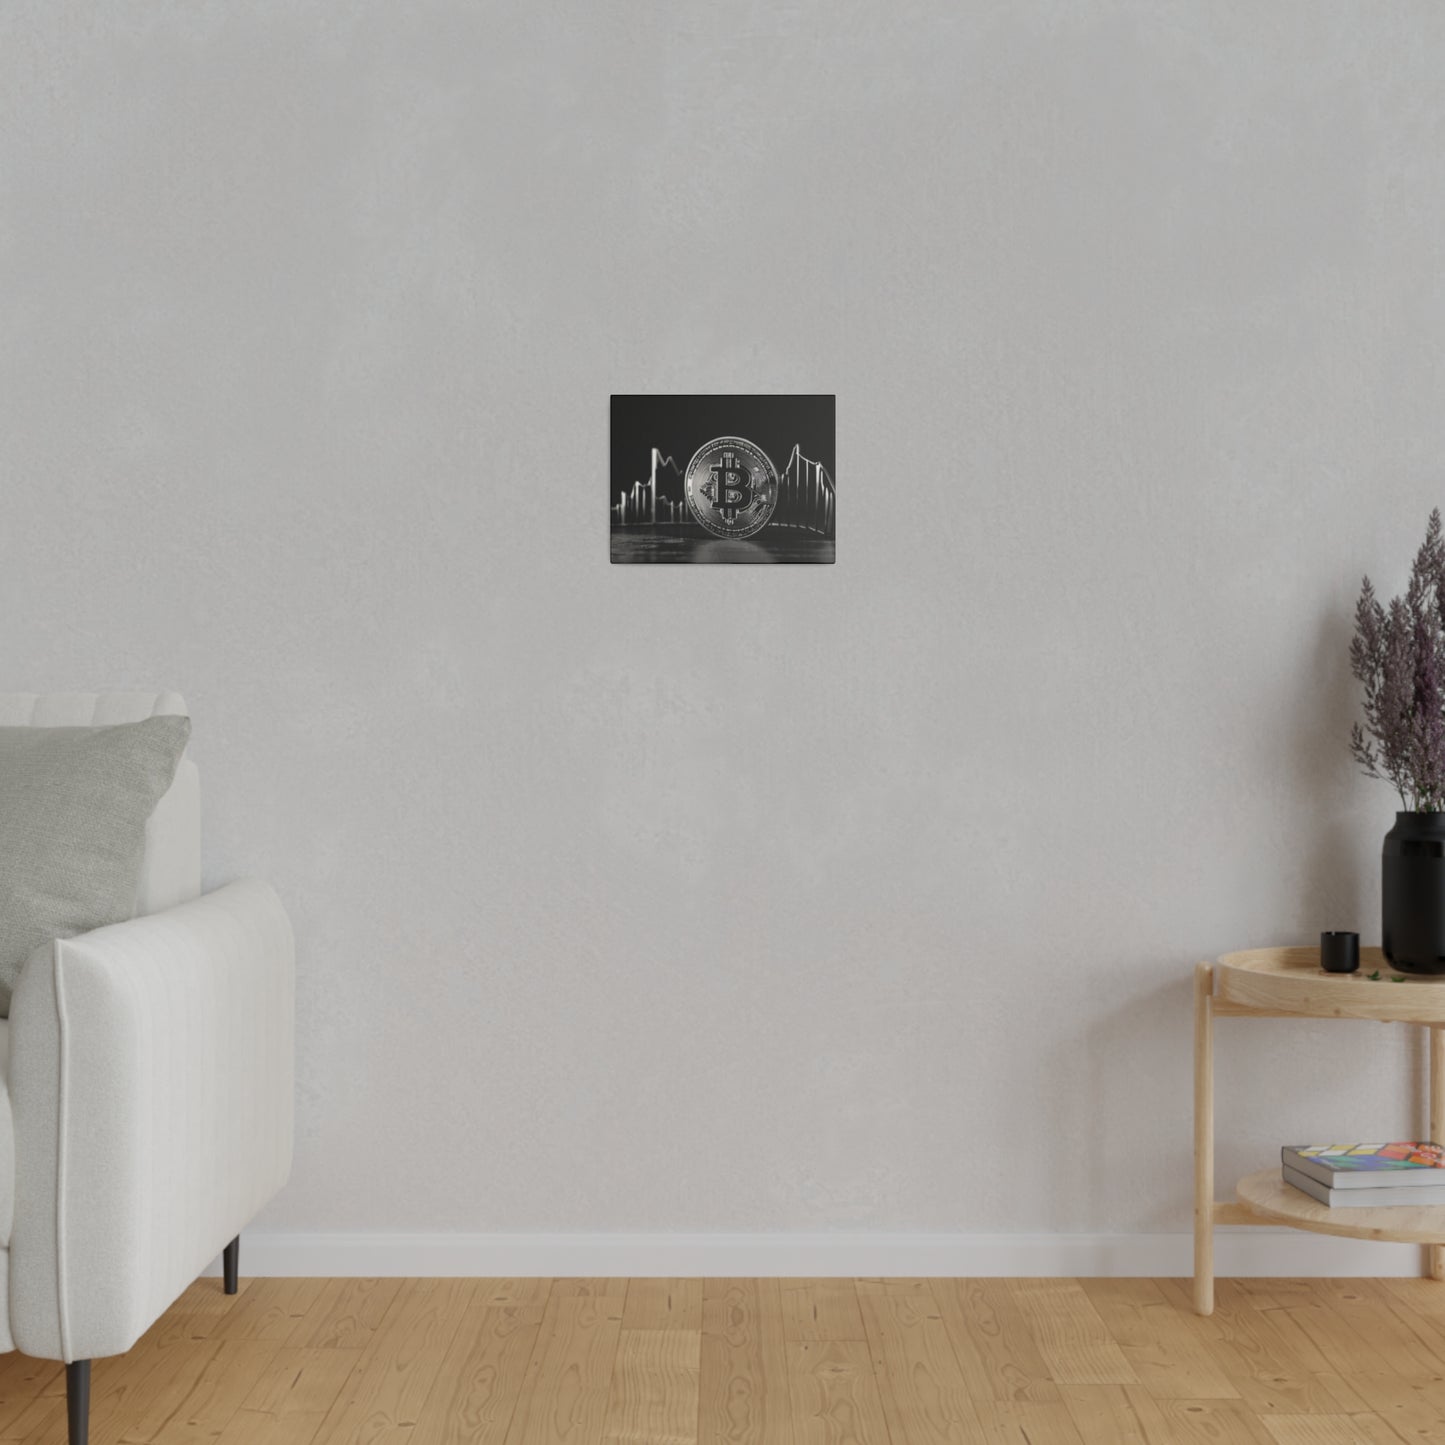 Black And White Bitcoin - Matte Canvas, Stretched, 0.75"